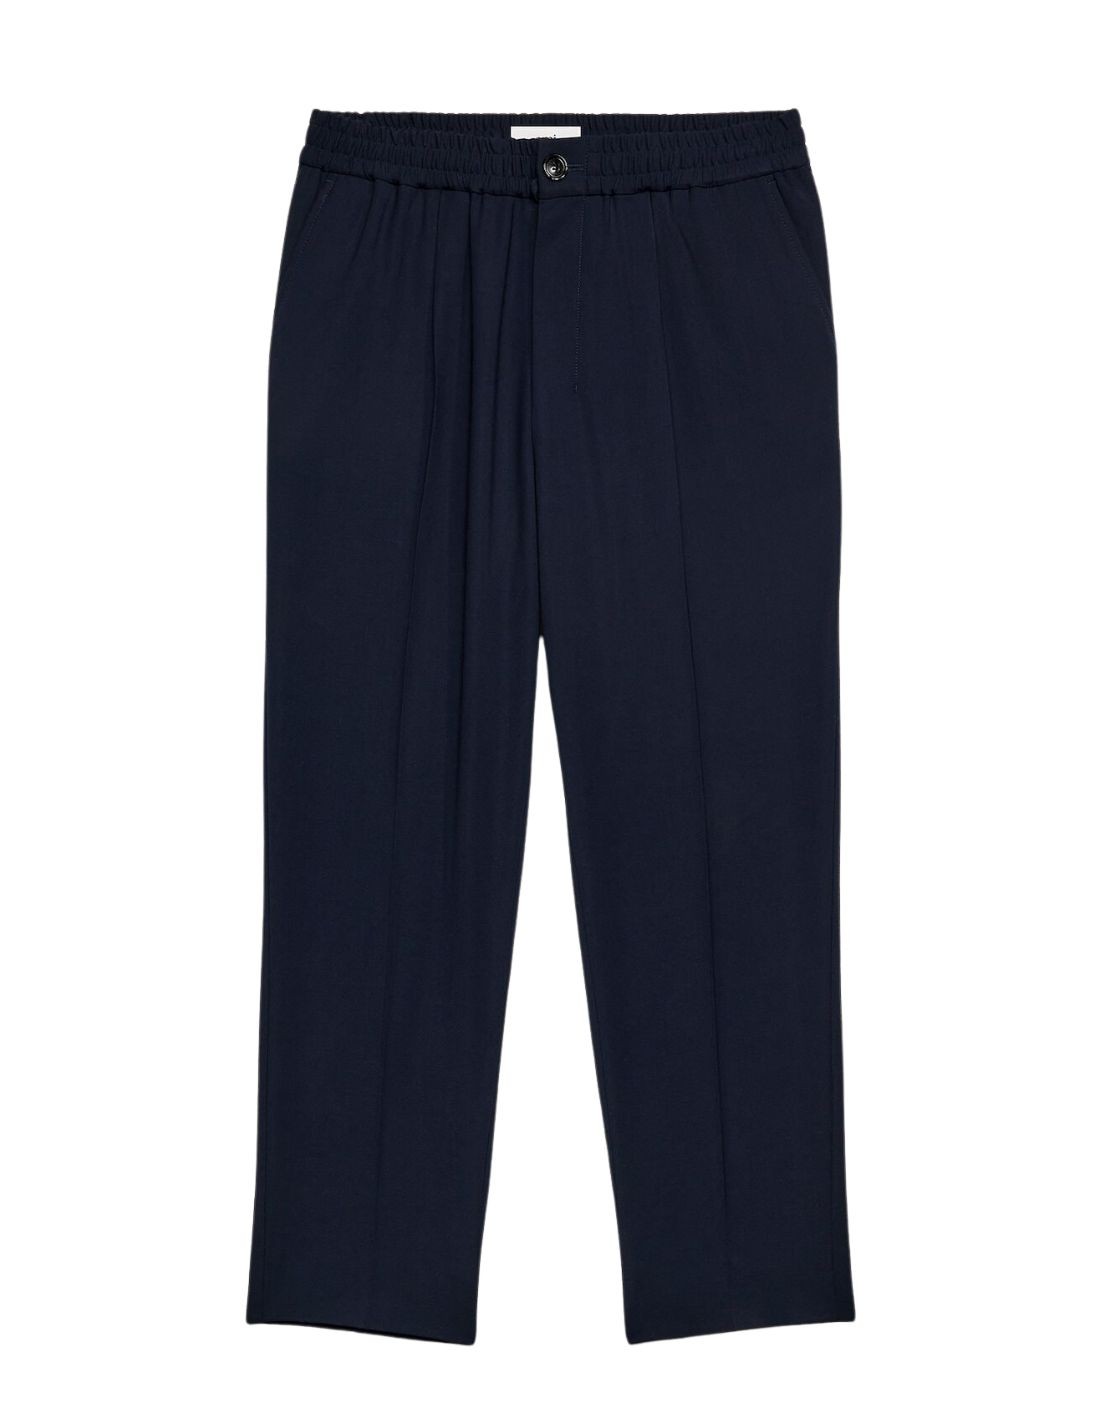 AMI PARIS navy trousers with elastic waistband FW3